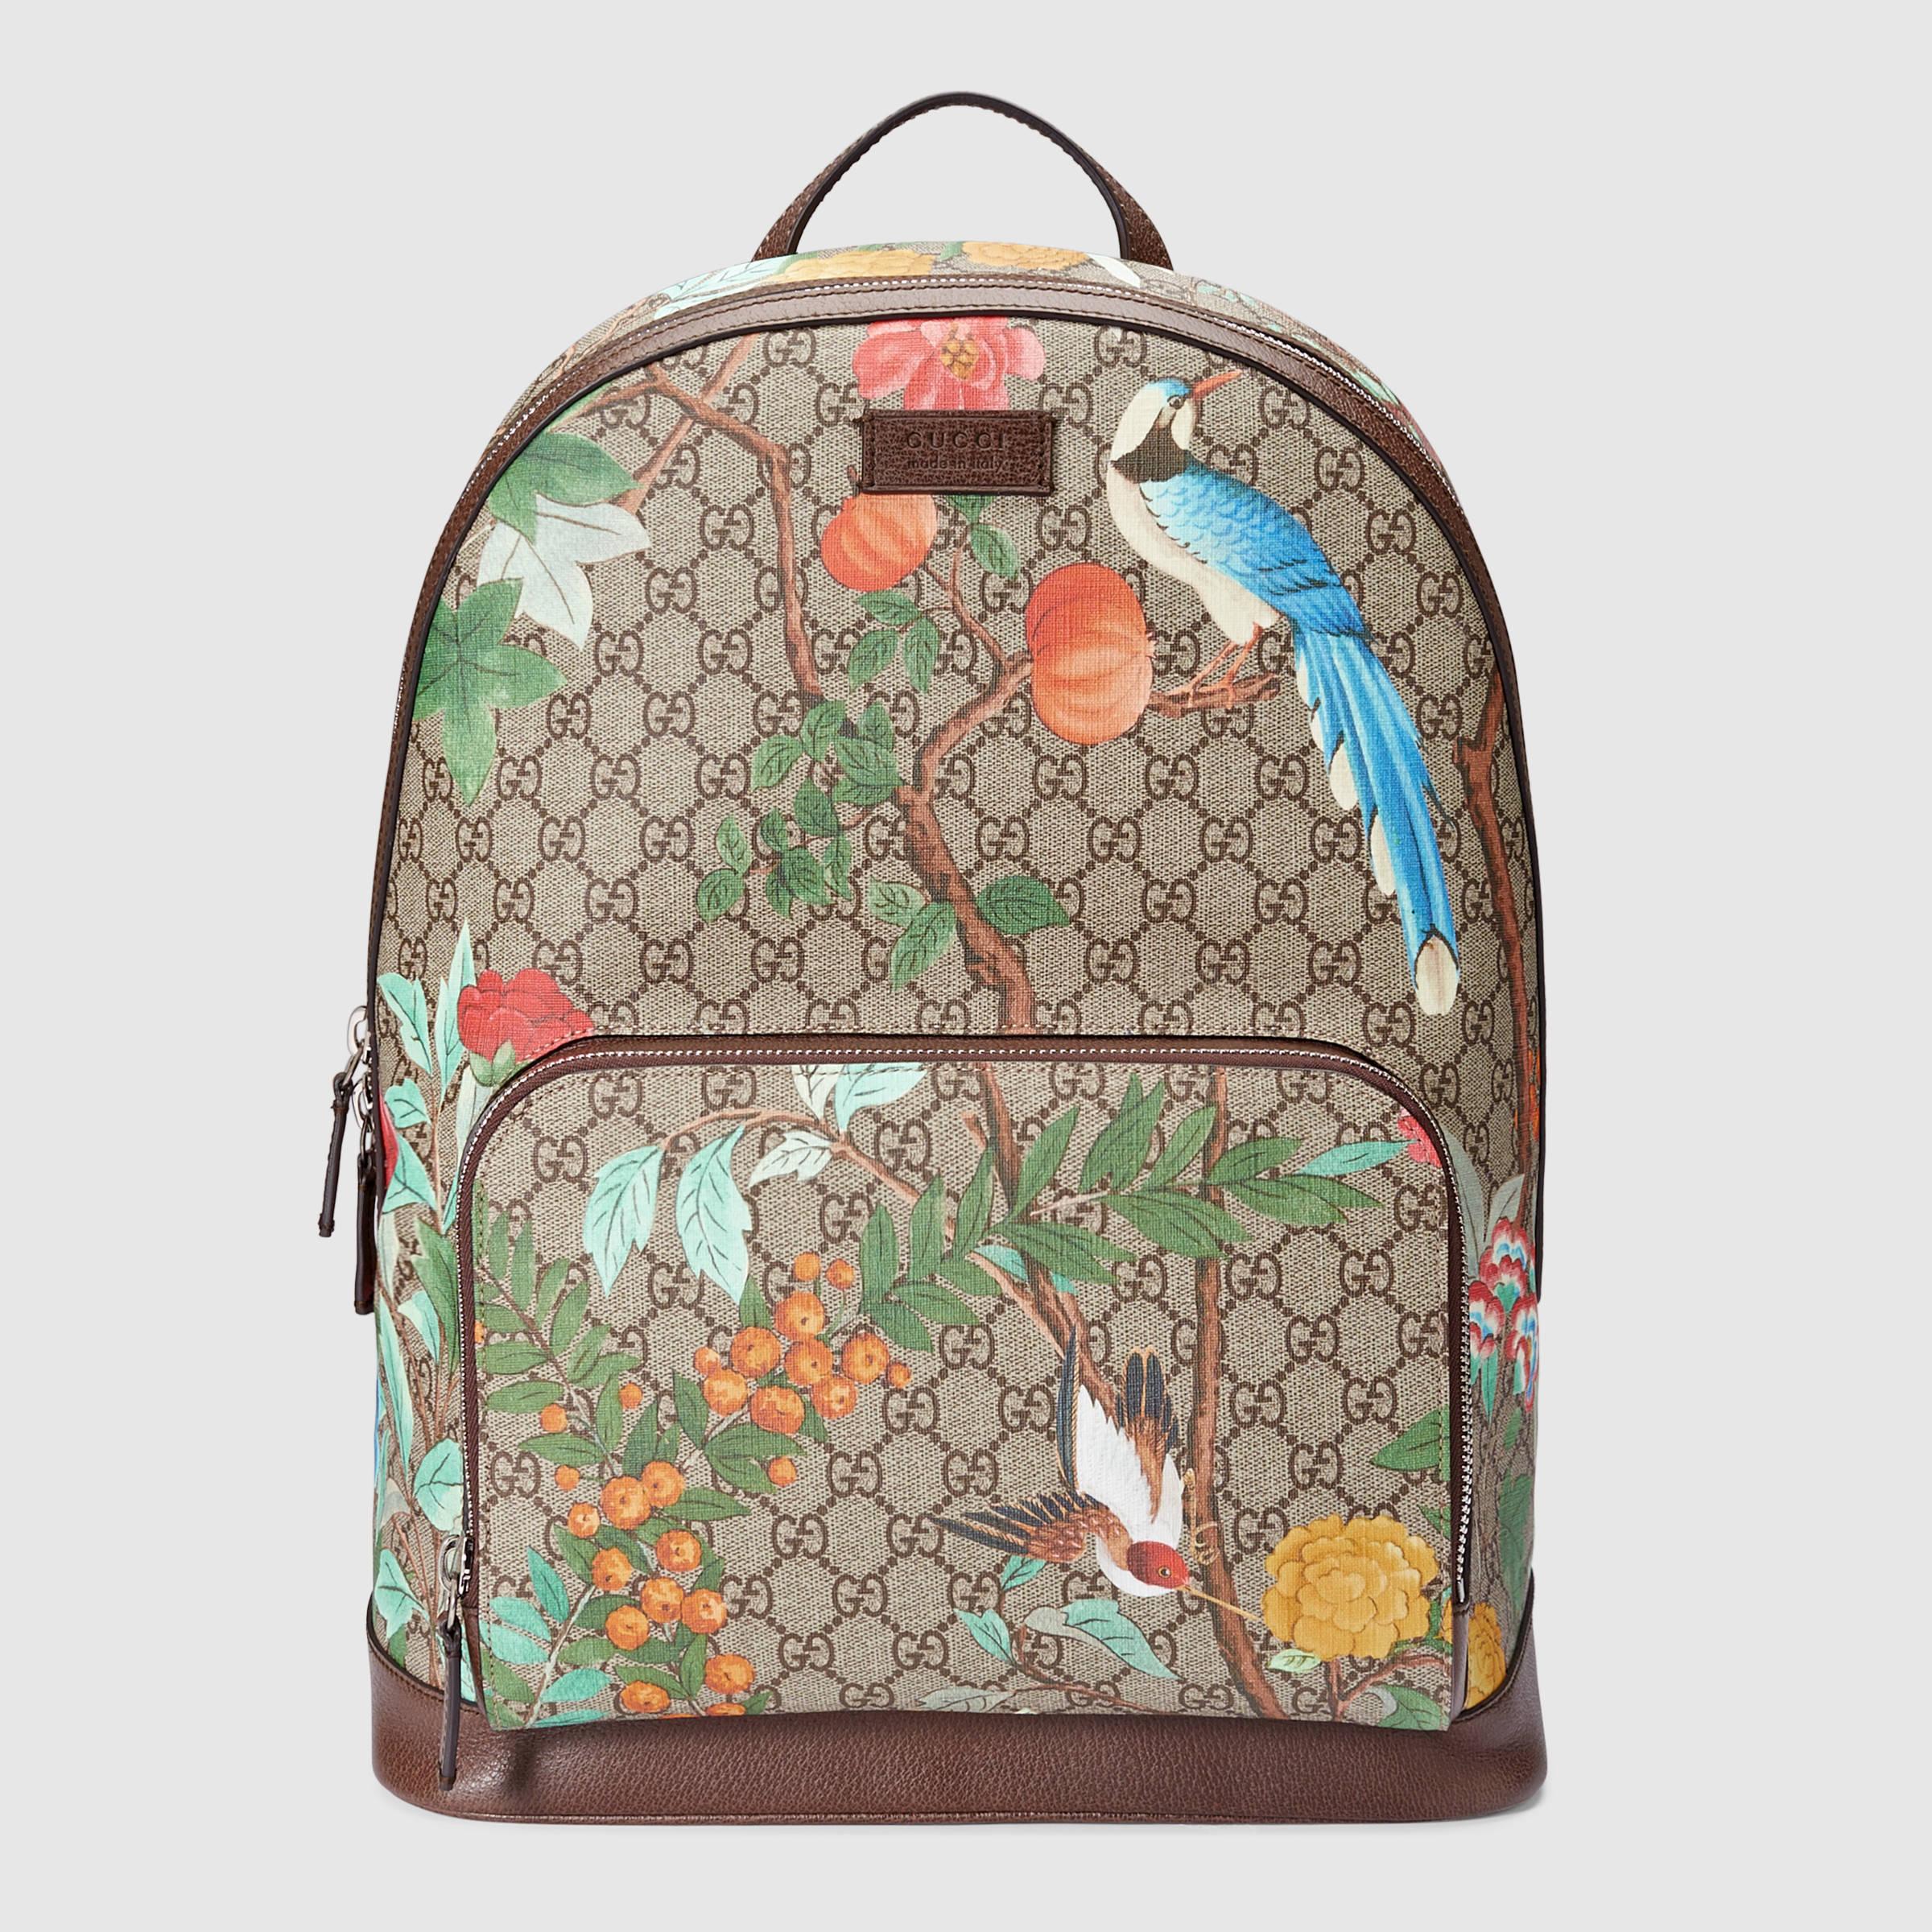 Gucci Tian GG Supreme Leather Backpack 